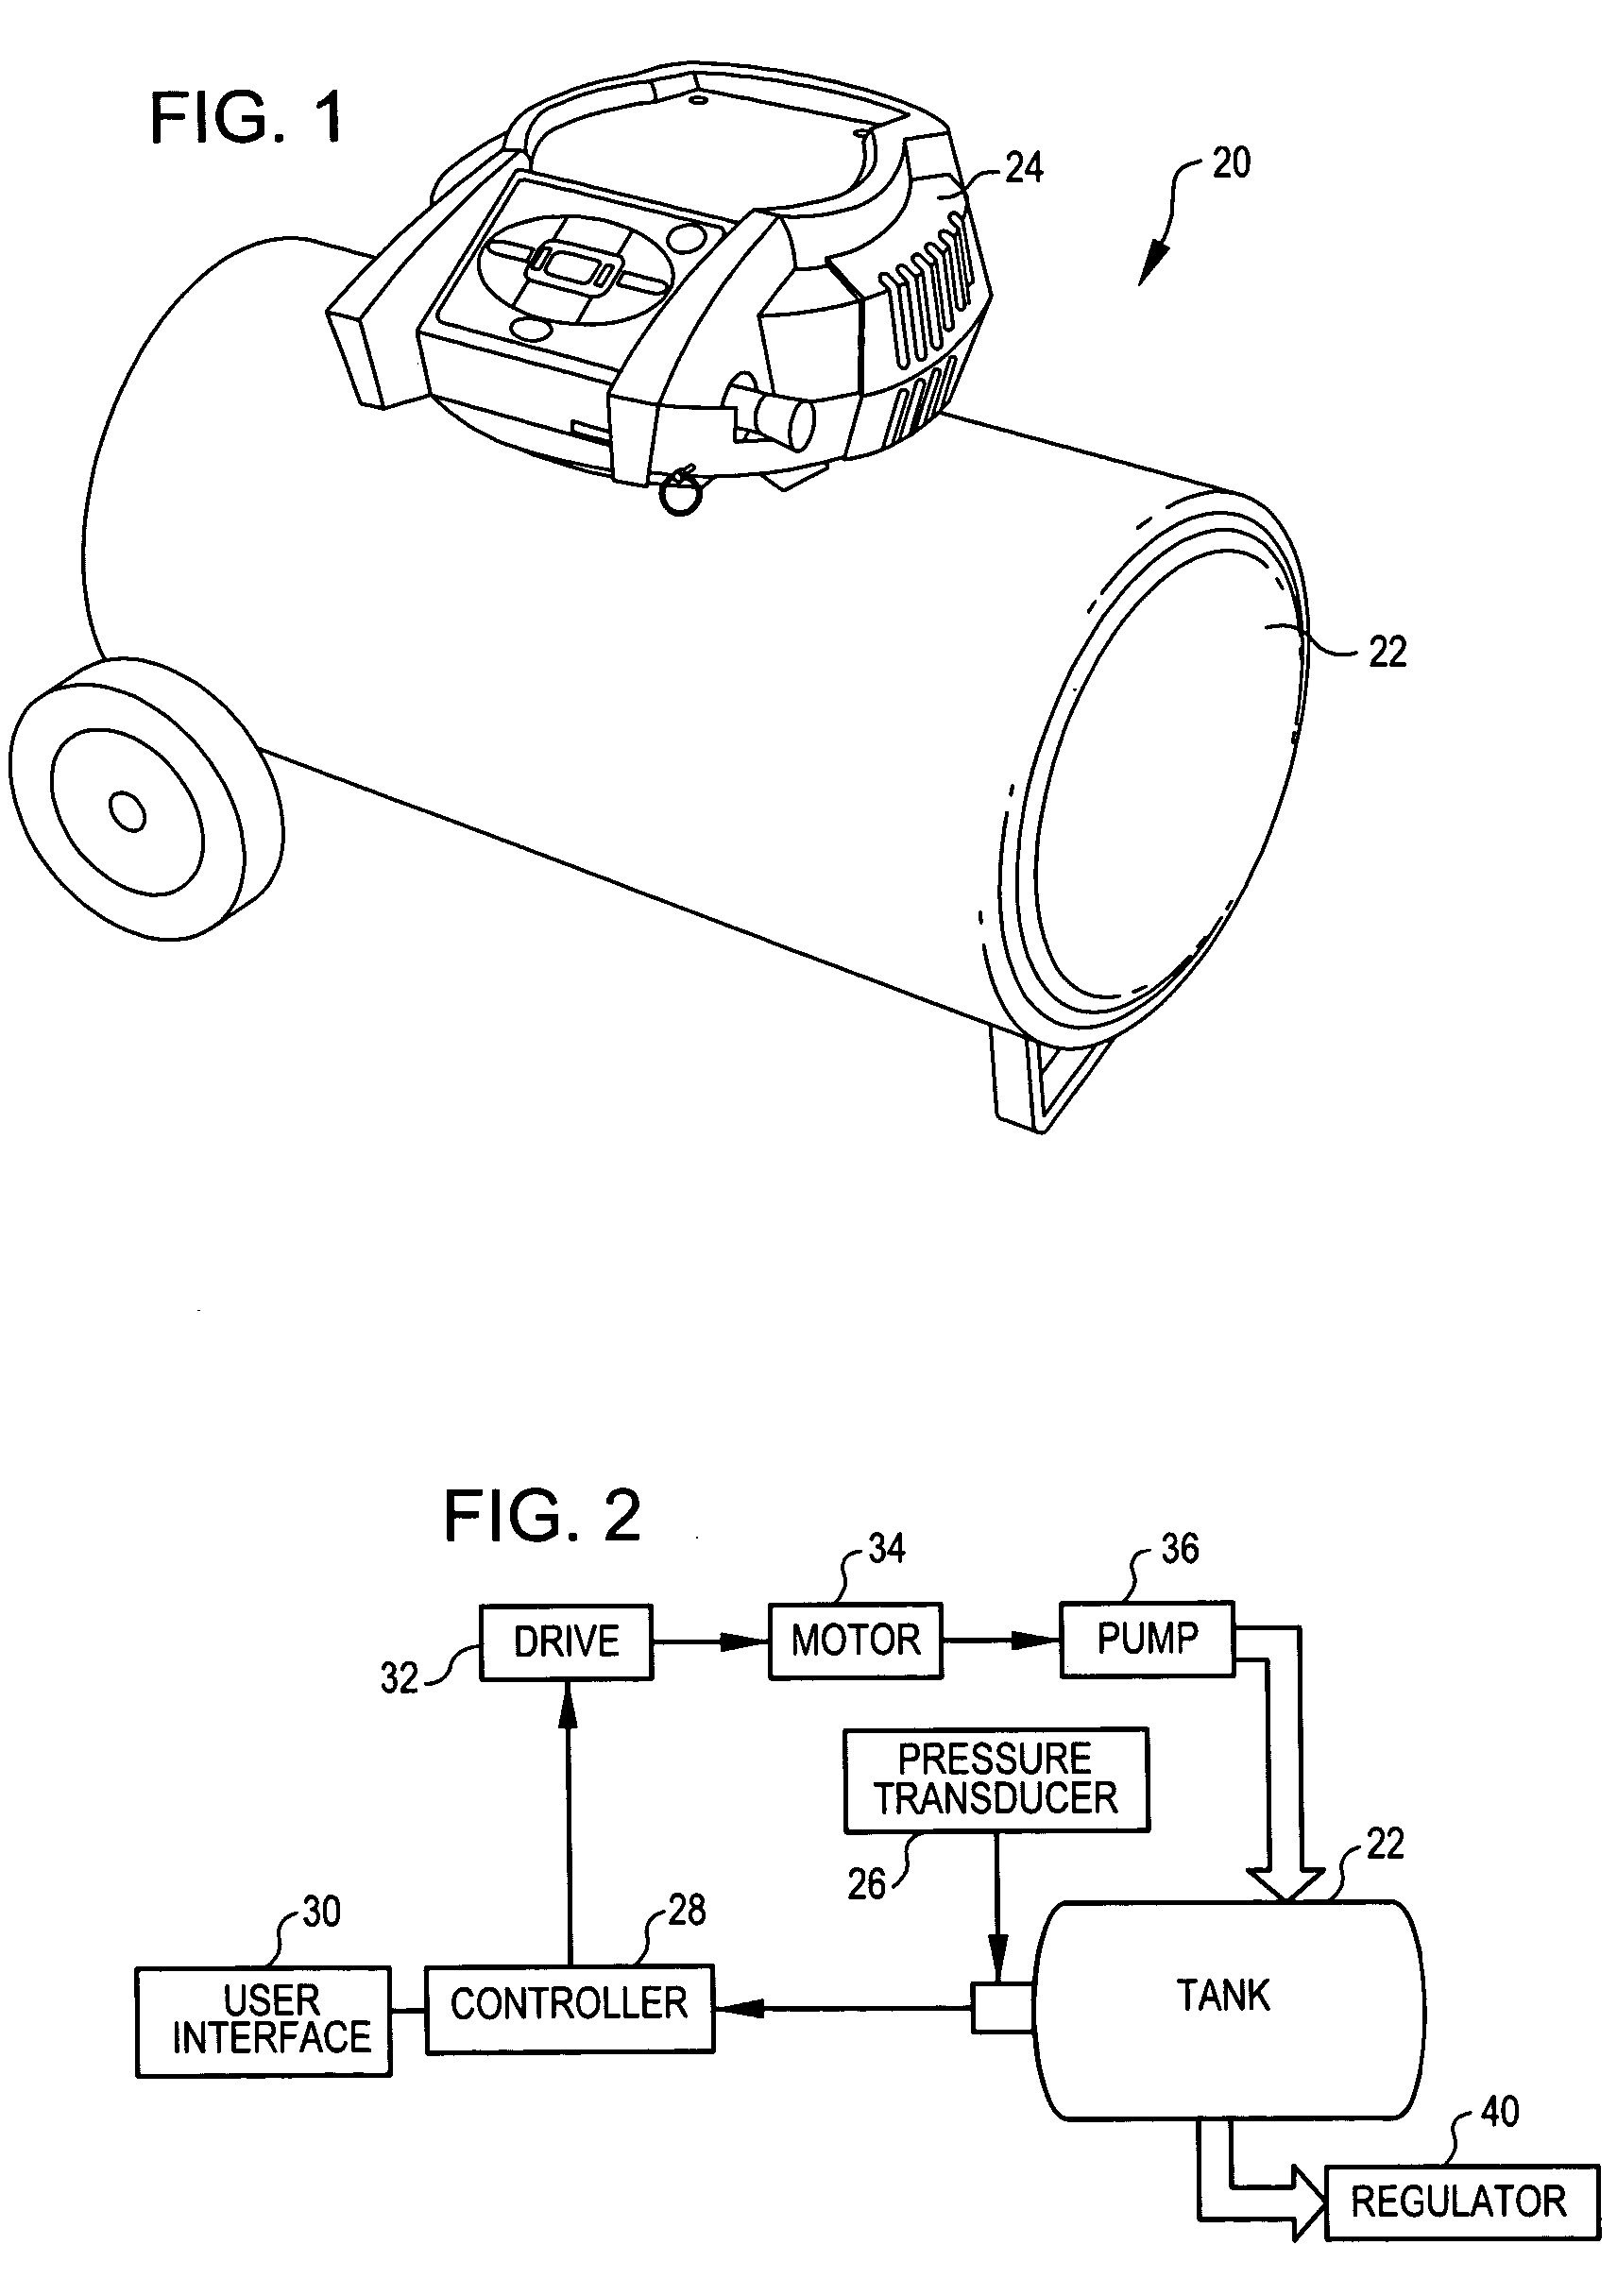 Air compressor with variable speed motor